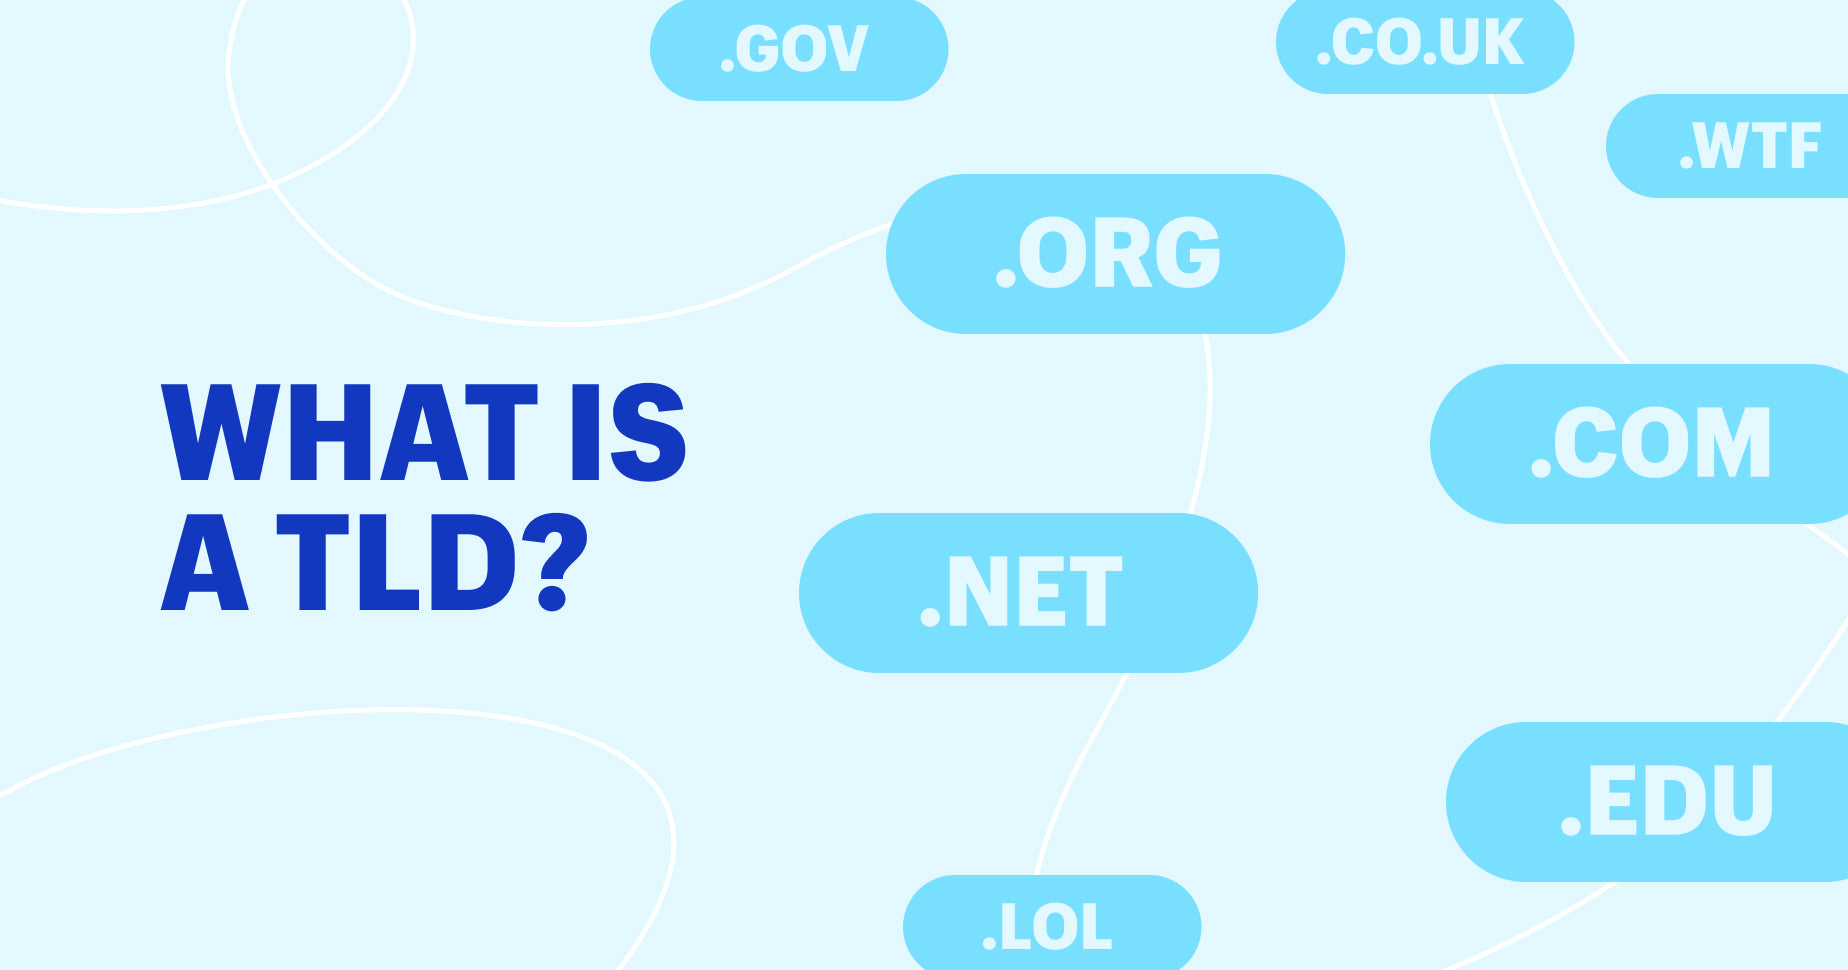 what is a TLD? .net .com .gov .co.uk